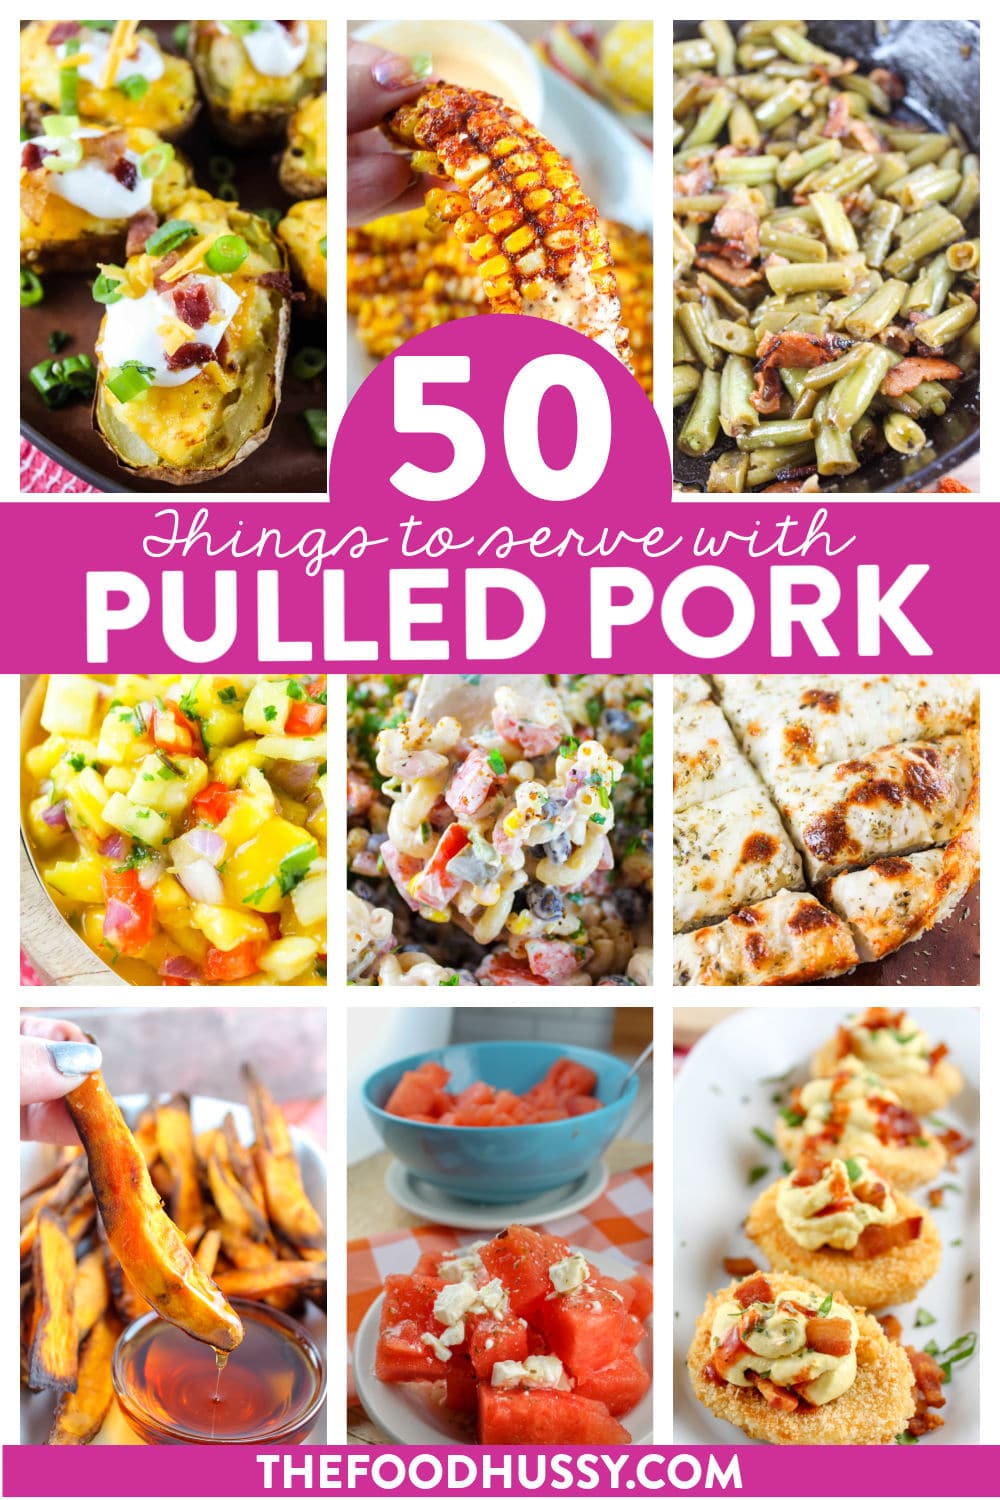 The dilemma of what to serve with pulled pork is a fun one! Pulled pork is my favorite potluck food but the great side dishes that go perfectly with it are just as delicious!  via @foodhussy